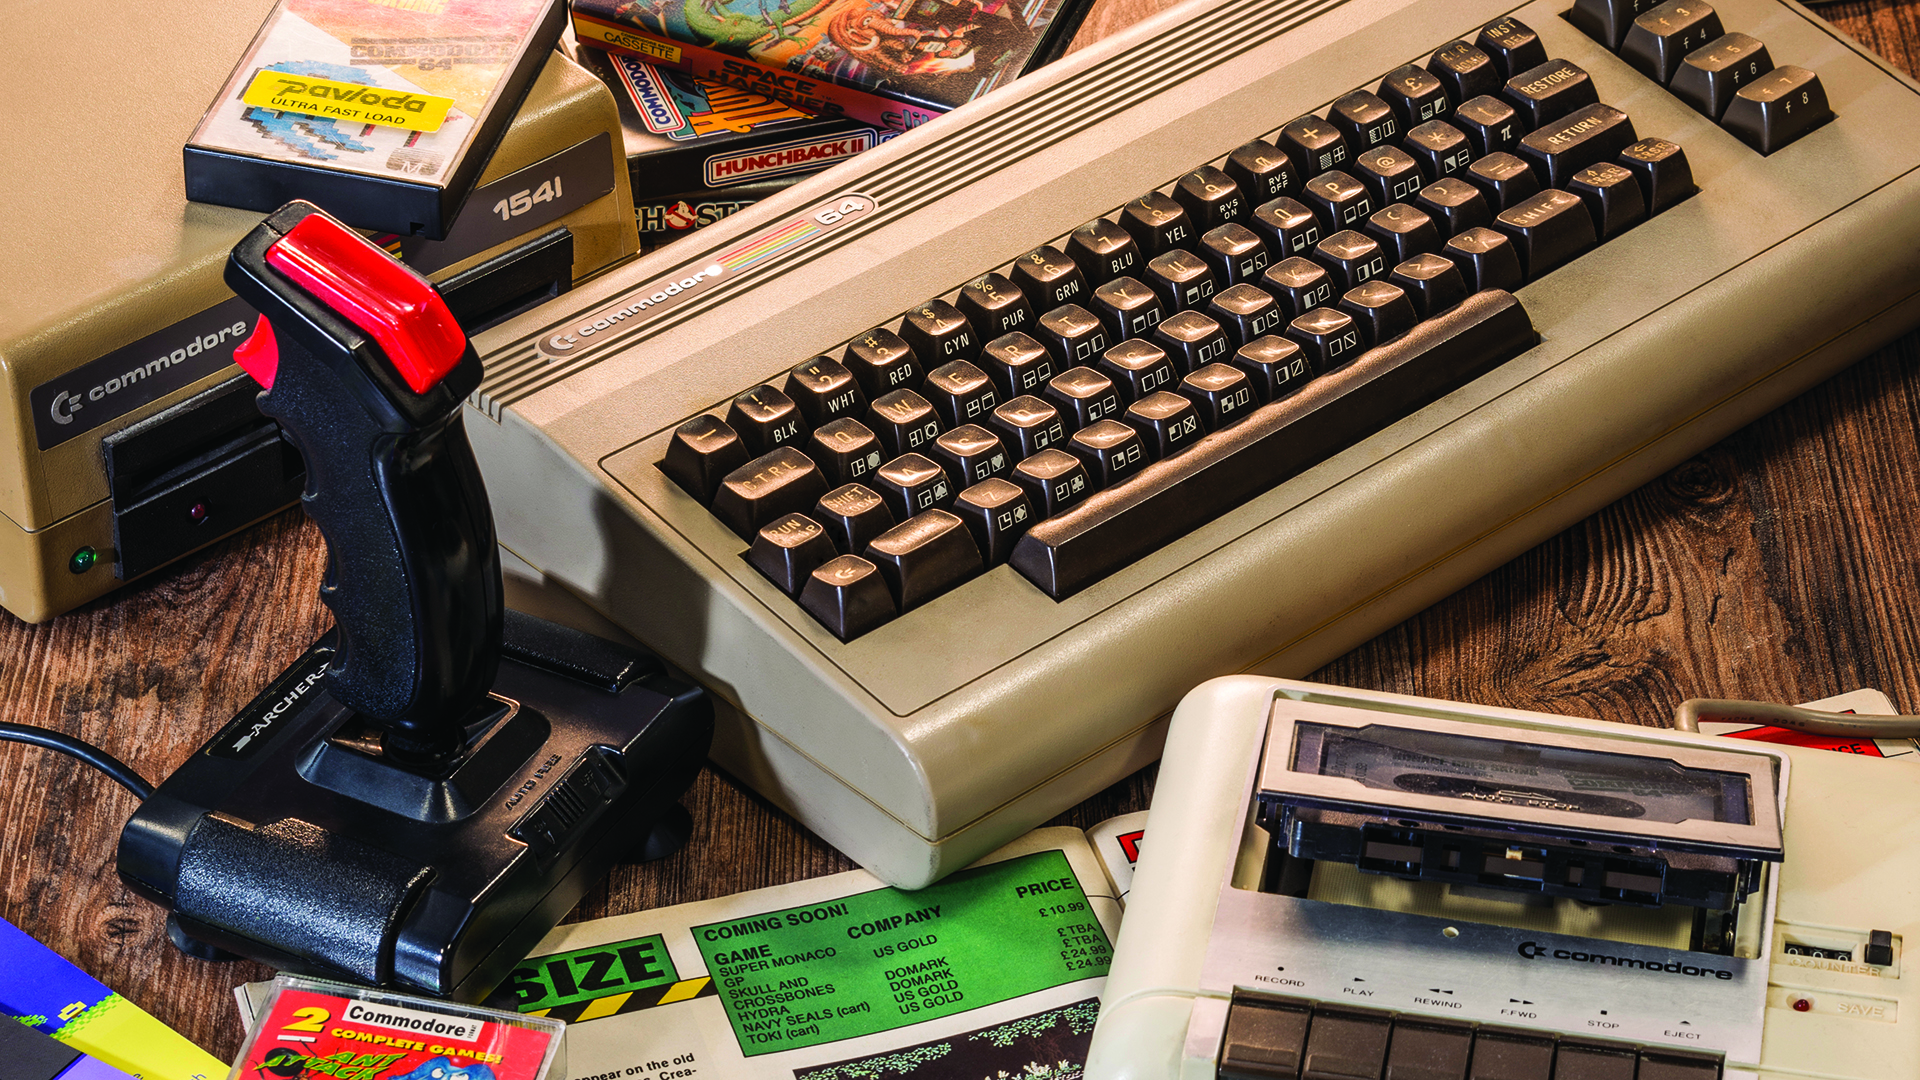 I Miss the Commodore 64, My First Console and Computer